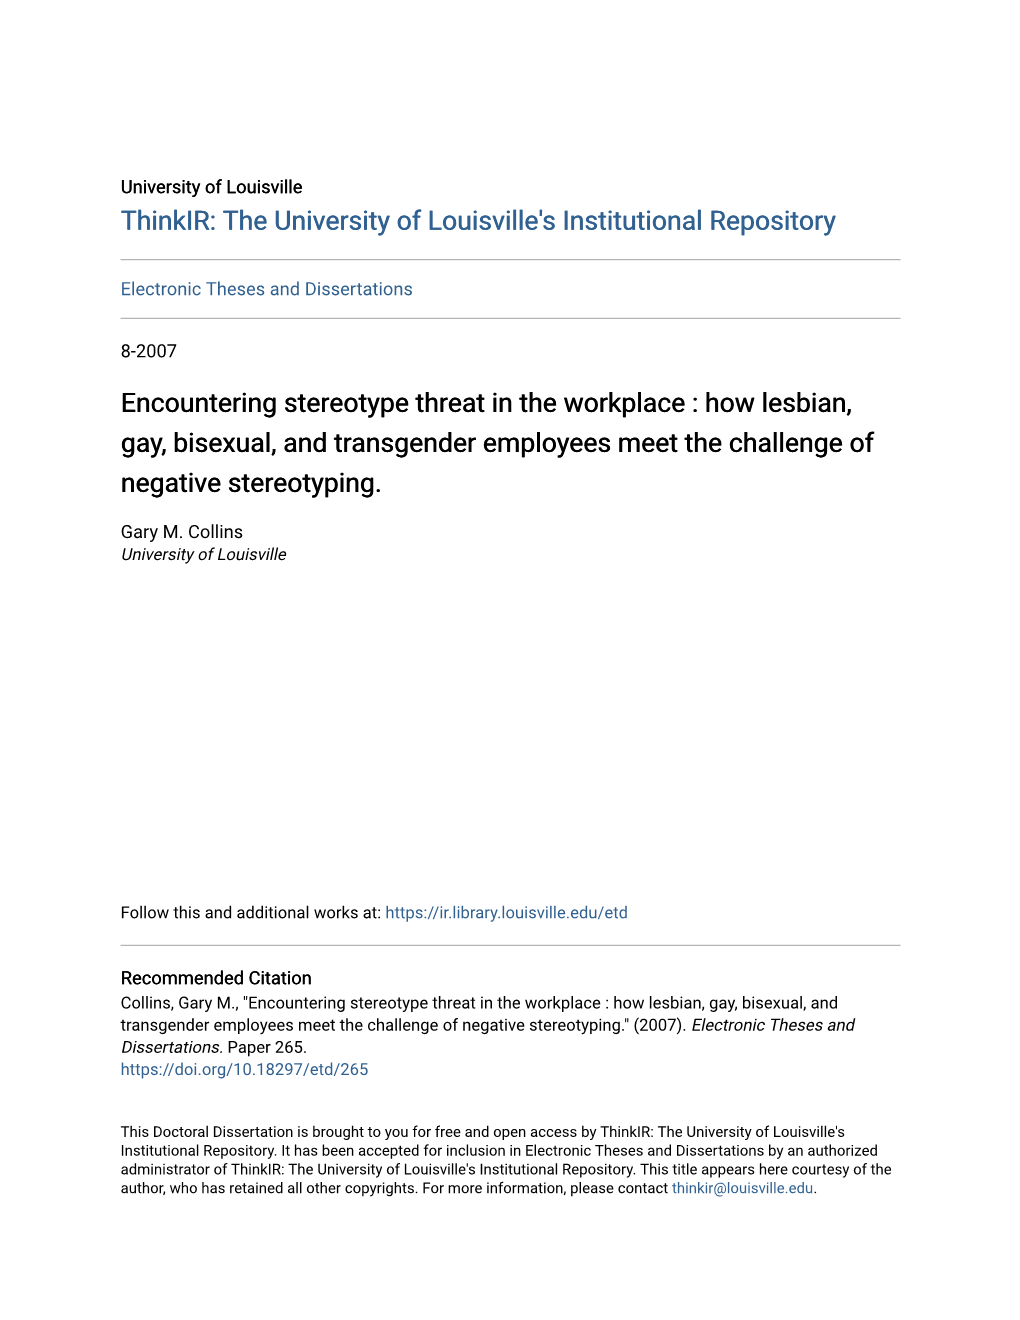 Encountering Stereotype Threat in the Workplace : How Lesbian, Gay, Bisexual, and Transgender Employees Meet the Challenge of Negative Stereotyping